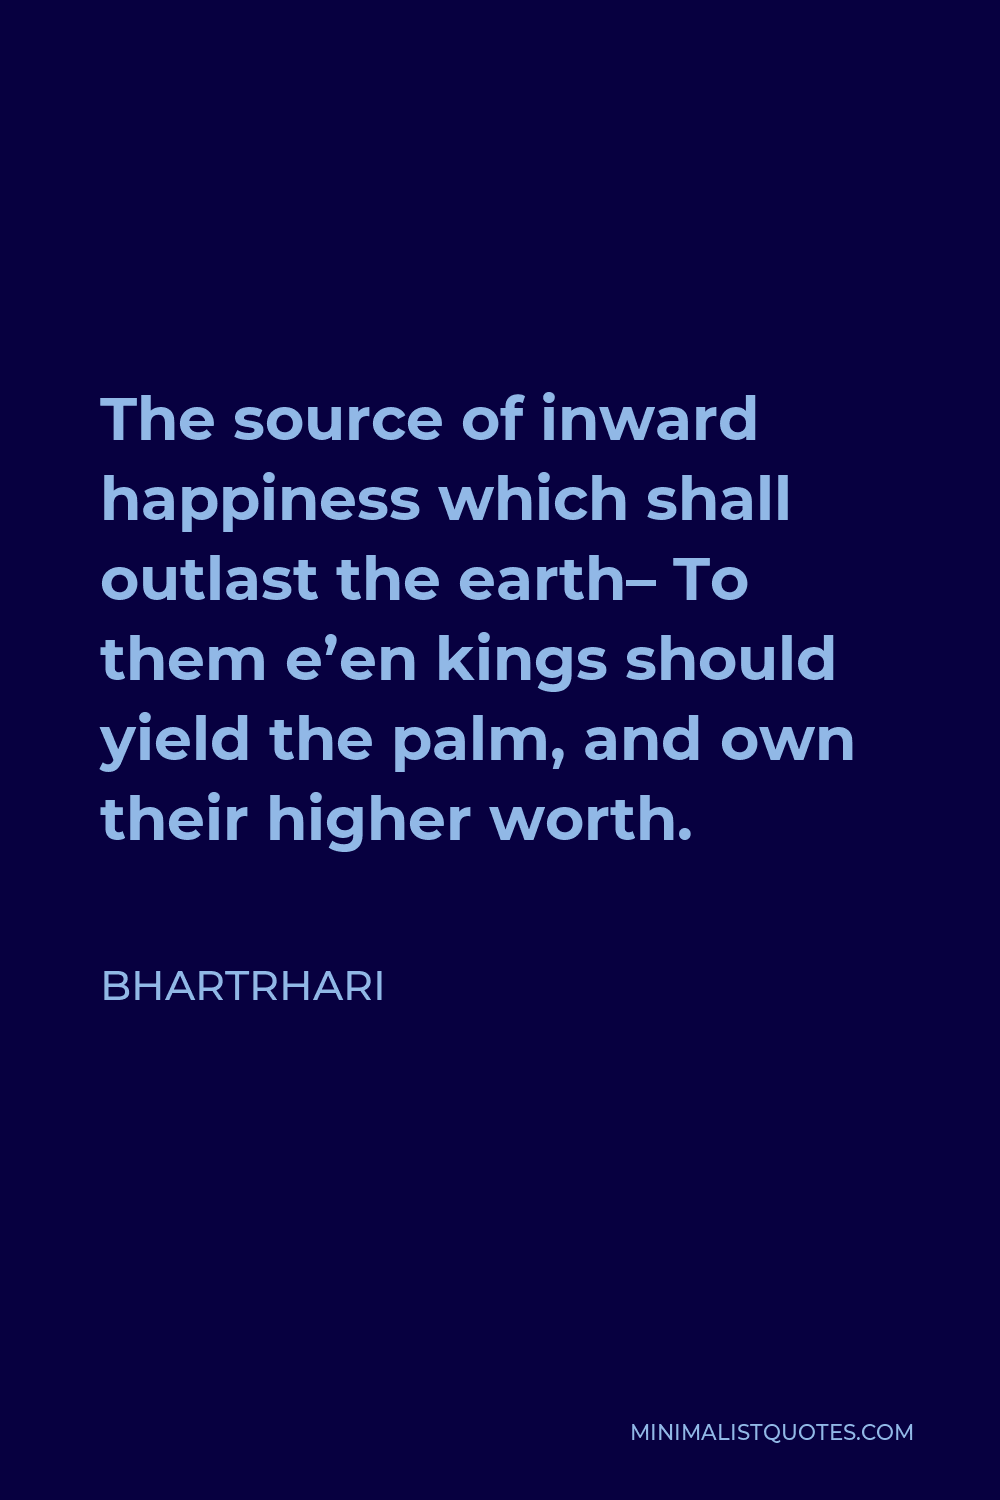 Bhartrhari Quote - The source of inward happiness which shall outlast the earth– To them e’en kings should yield the palm, and own their higher worth.